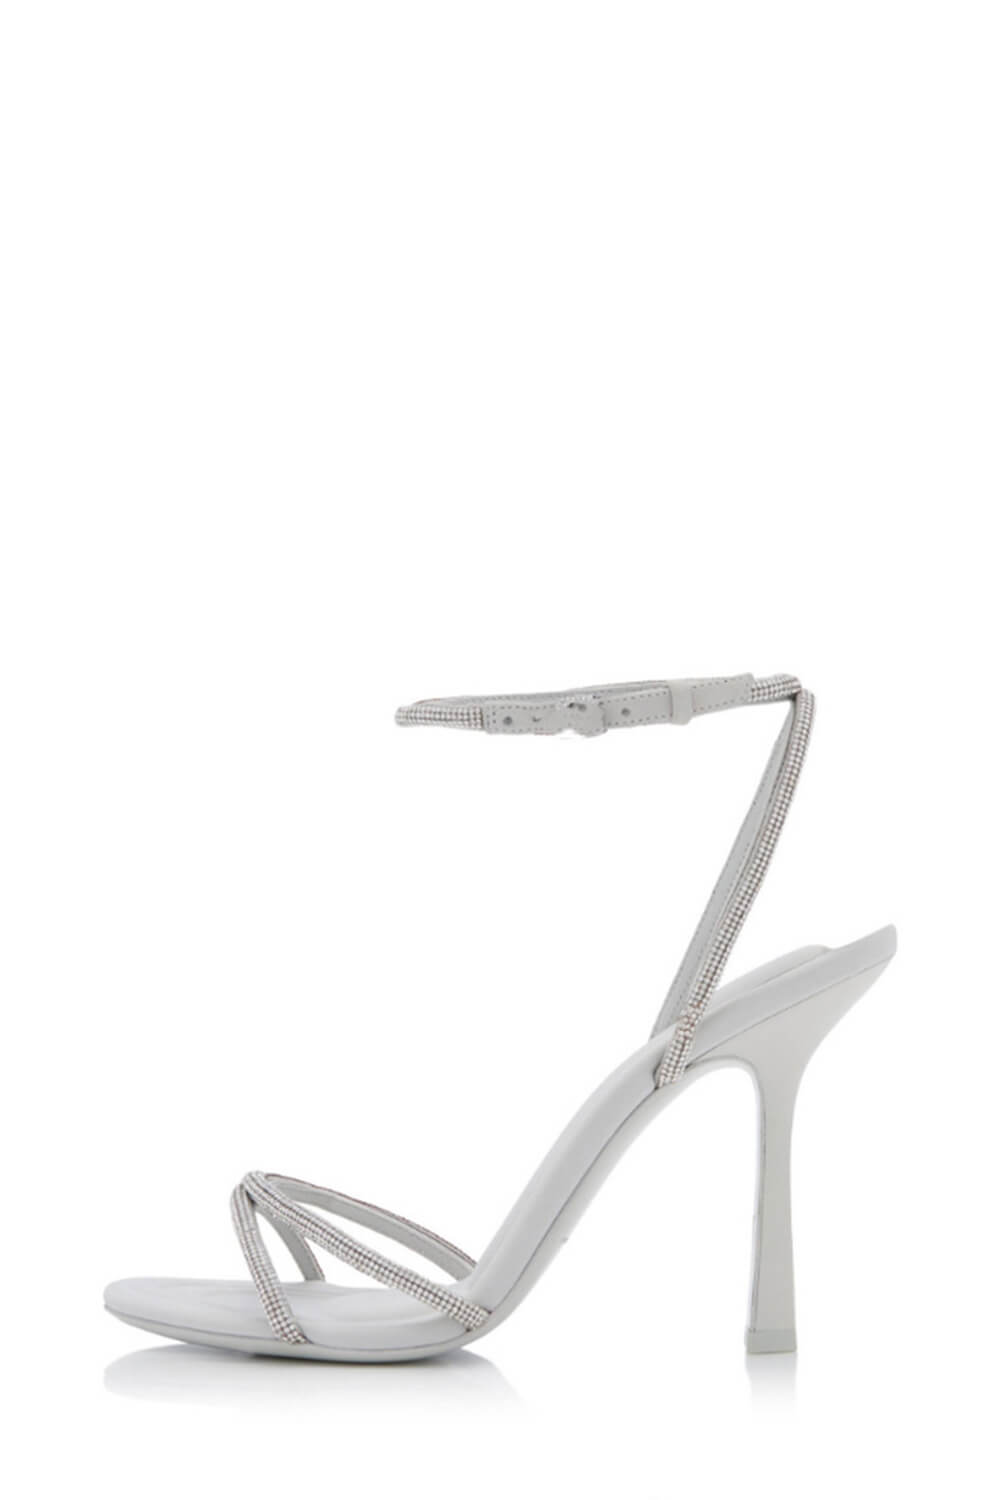 Crystal Faux Leather Square-Toe Heeled Ankle Sandals - White